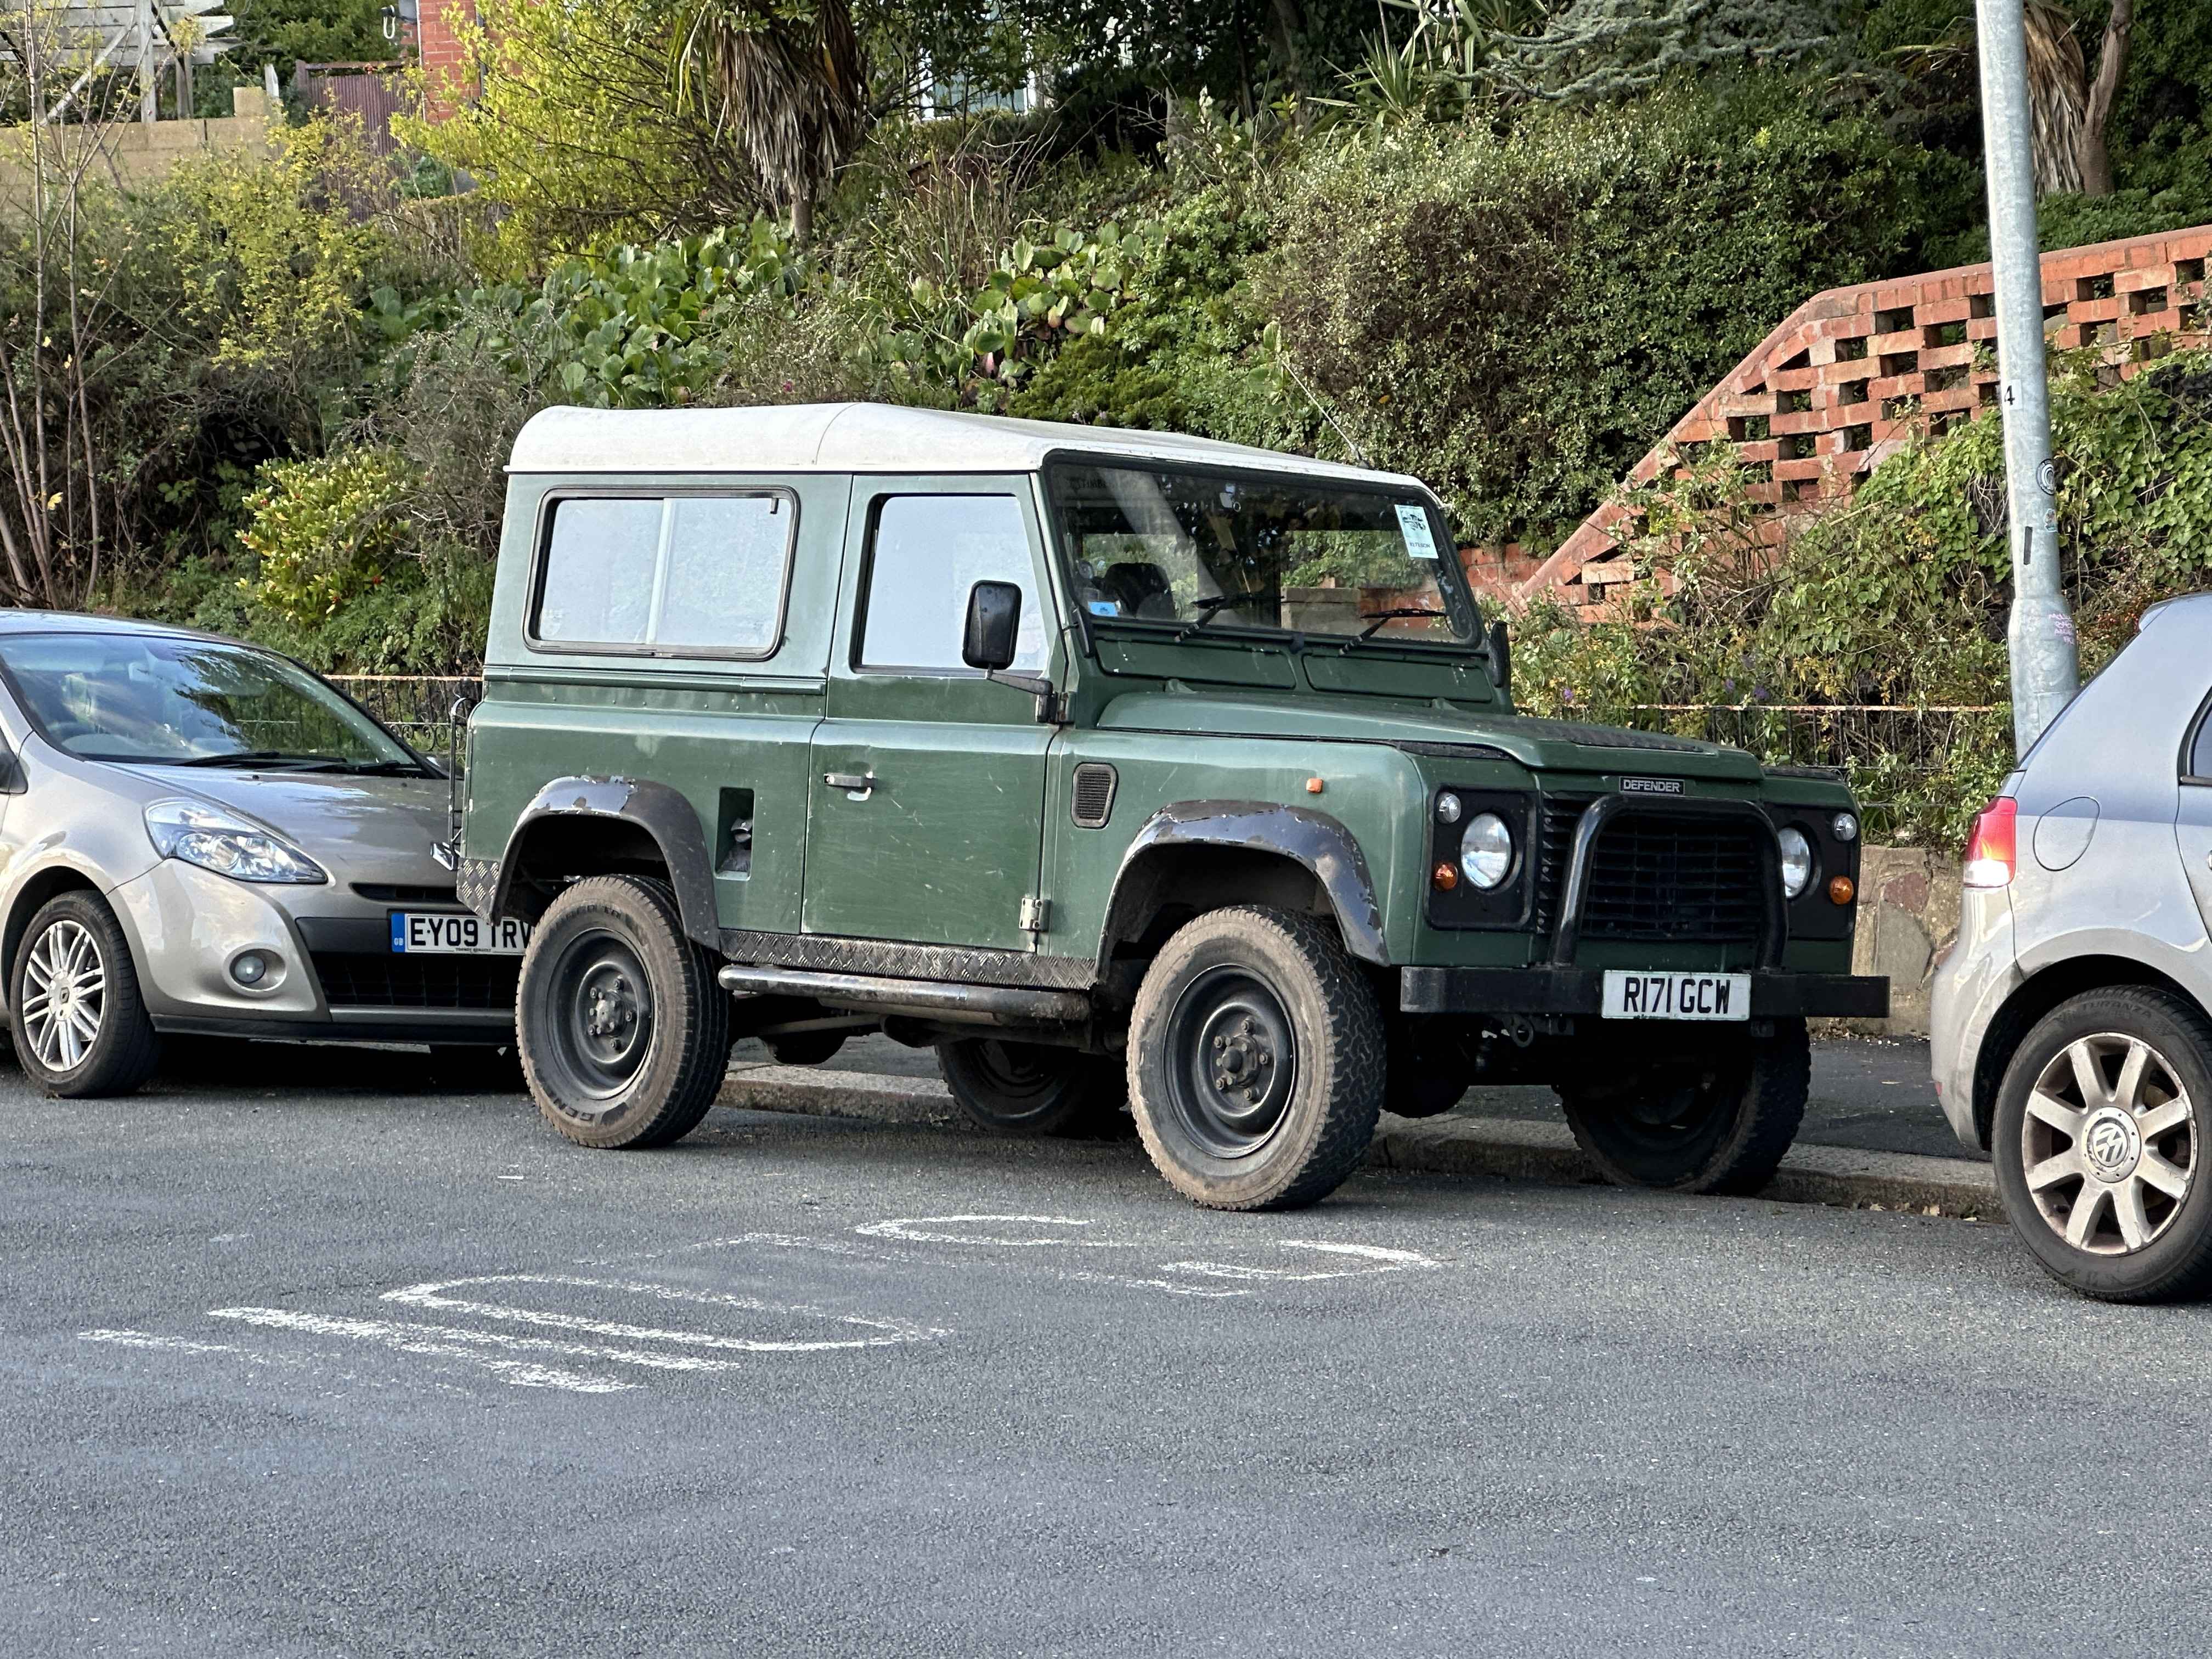 Photograph of R171 GCW - a Green Land Rover Defender parked in Hollingdean by a non-resident. 